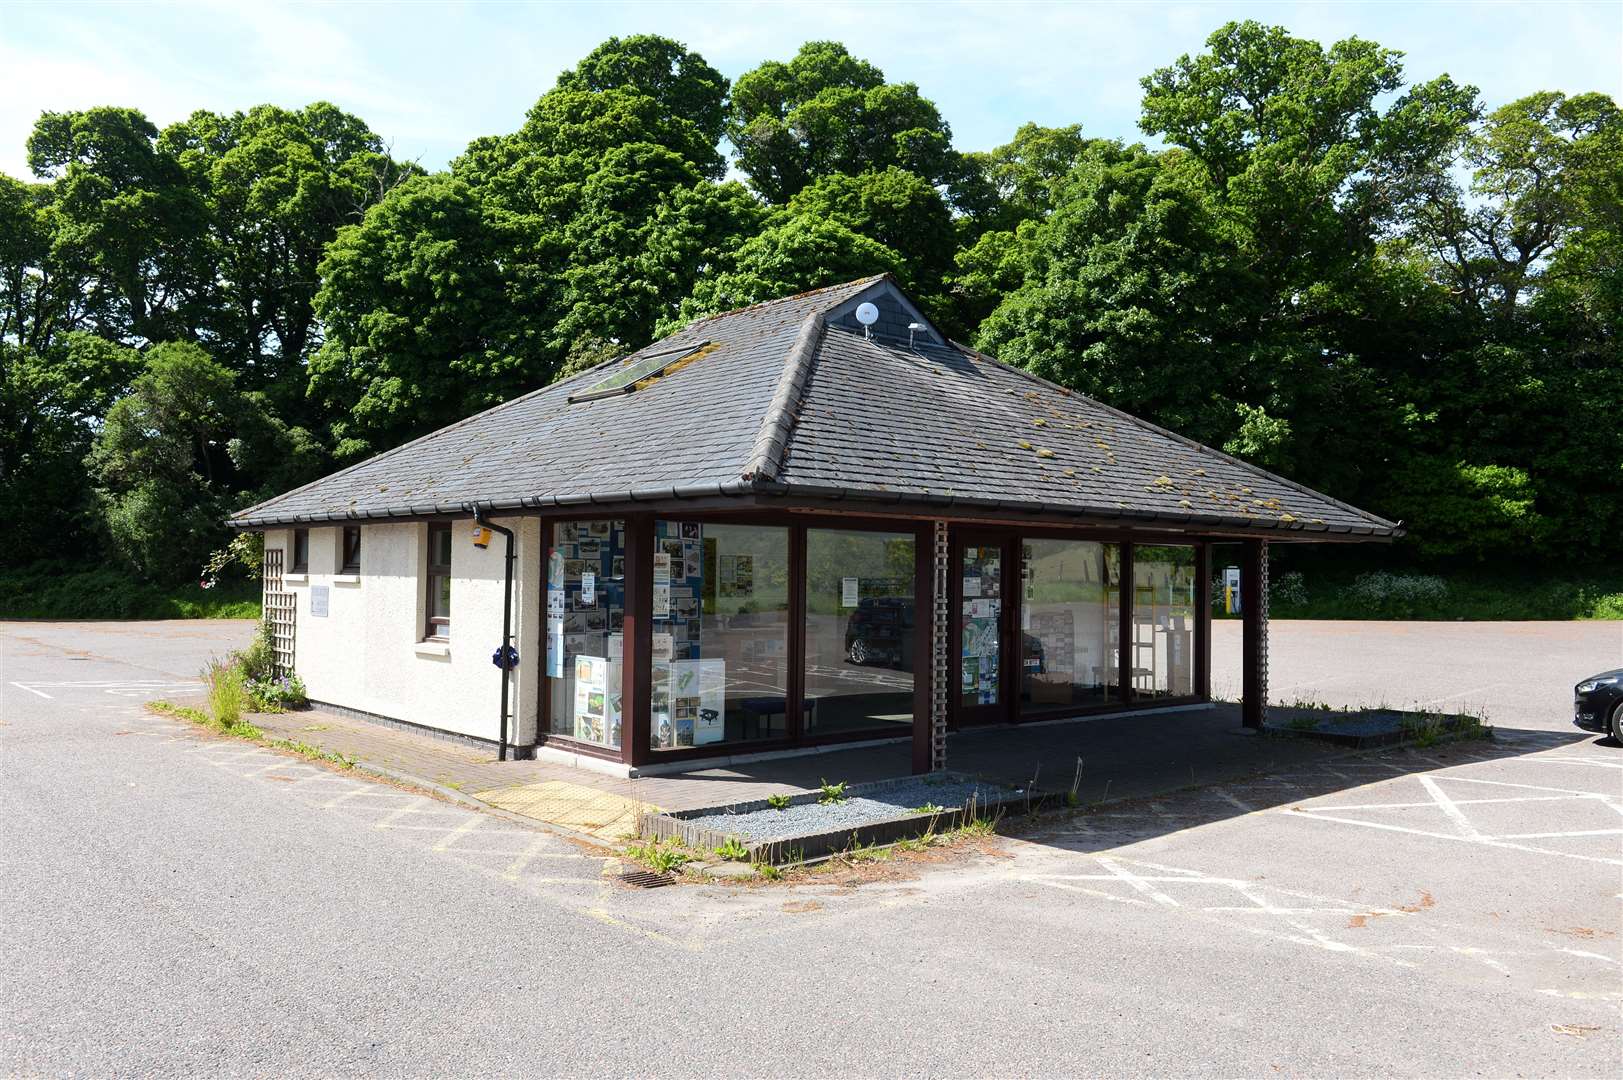 The former tourist information in Drumndrochit which is set to become the Loch Ness Hub.